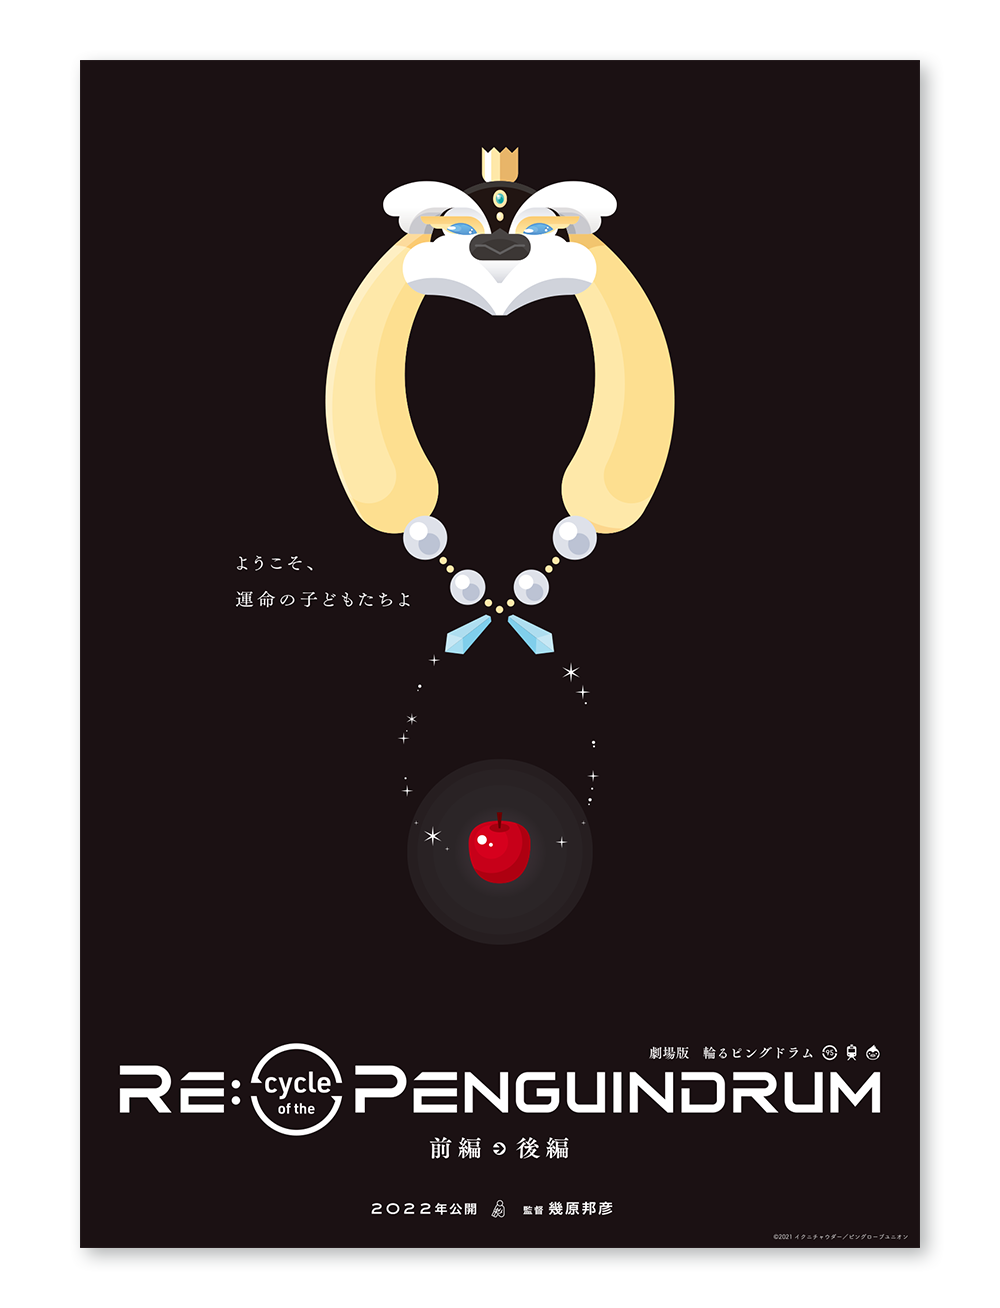 RE:Cycle of the PENGUINDRUM ティザー　ポスター2